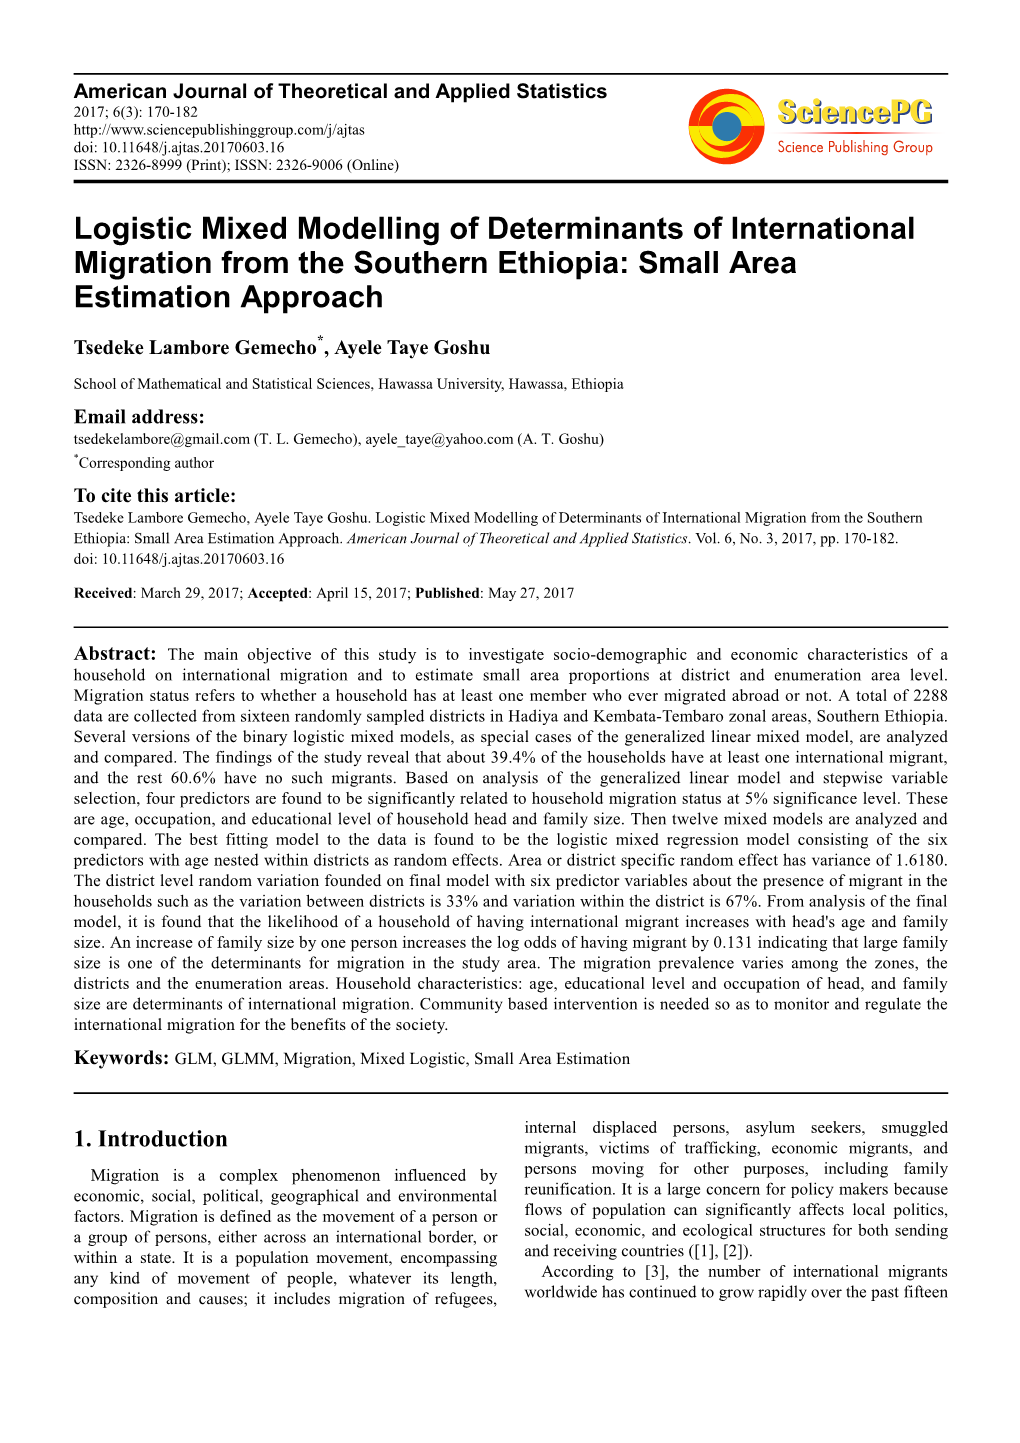 Logistic Mixed Modelling of Determinants of International Migration from the Southern Ethiopia: Small Area Estimation Approach